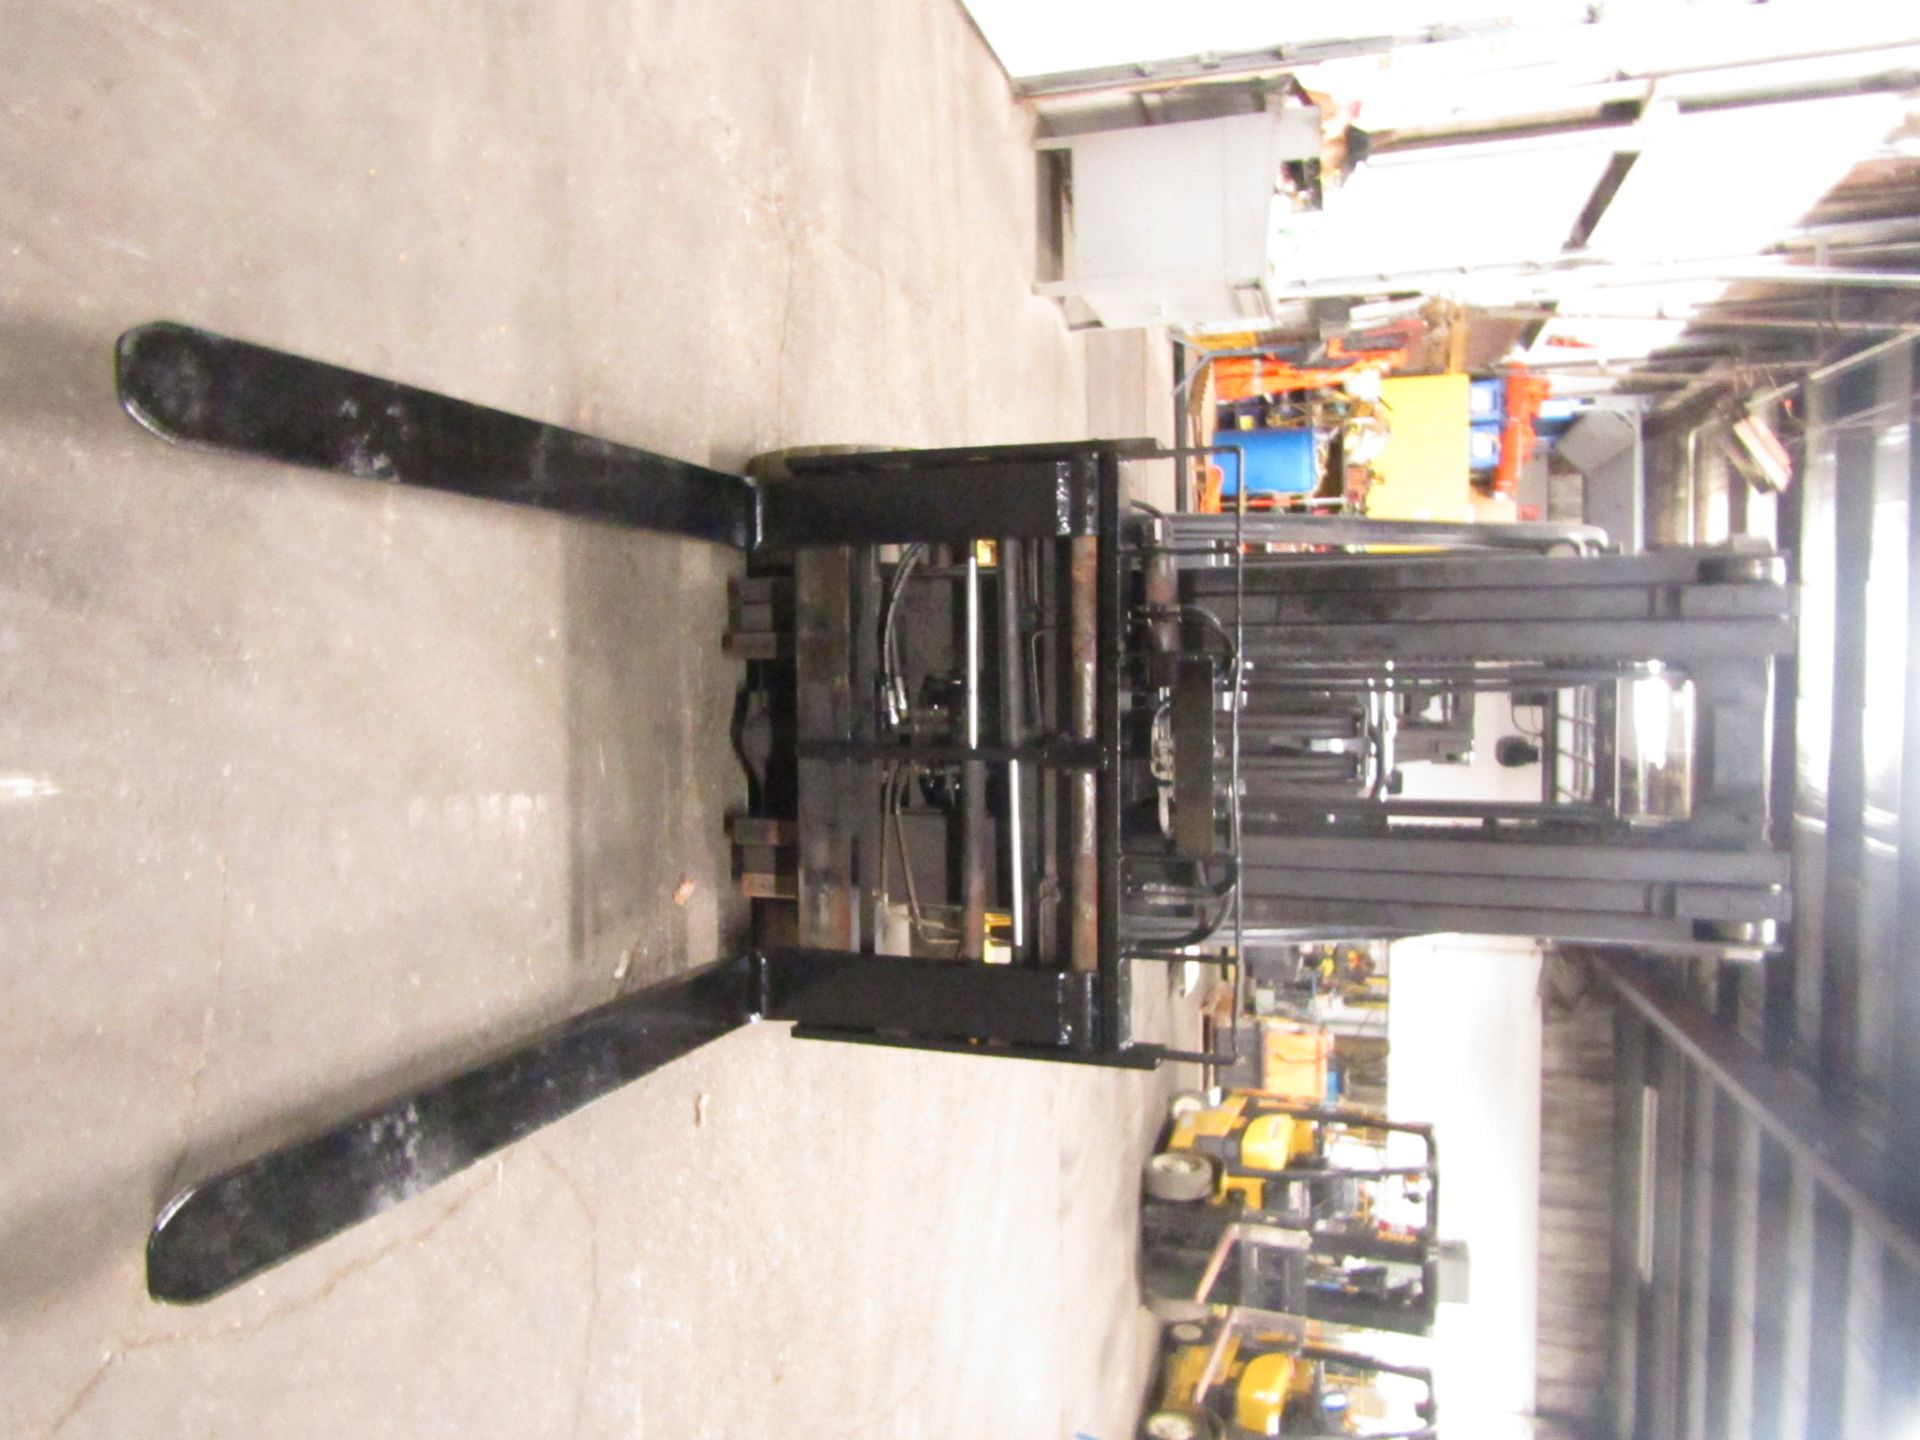 2014 Yale 12000lbs Capacity Forklift with 3-stage mast - LPG (propane) with sideshift & fork - Image 2 of 2